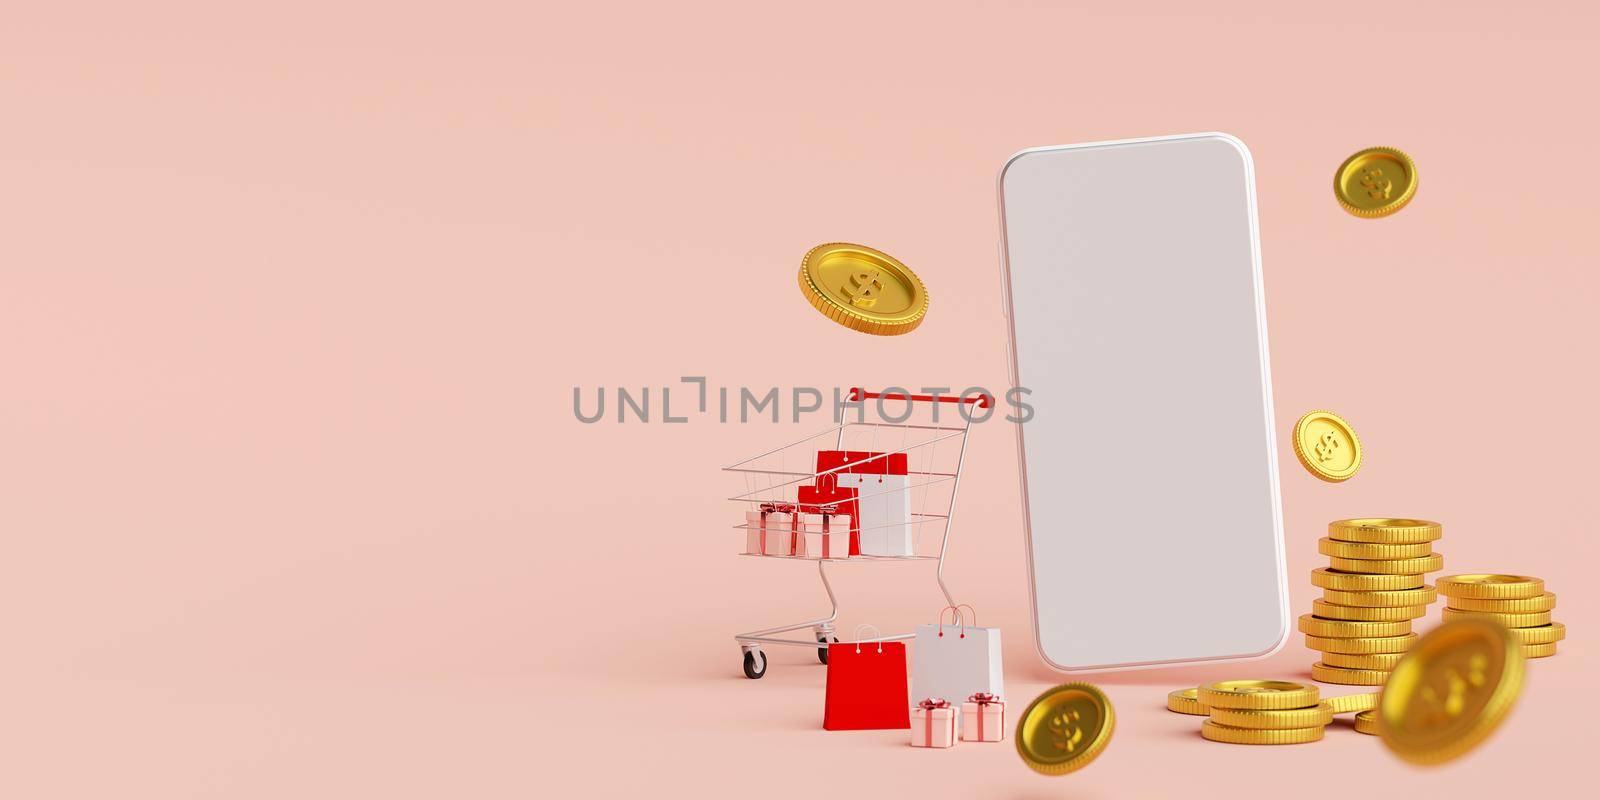 Scene of smartphone with shopping cart and golden coin, Banner background, 3d rendering by nutzchotwarut